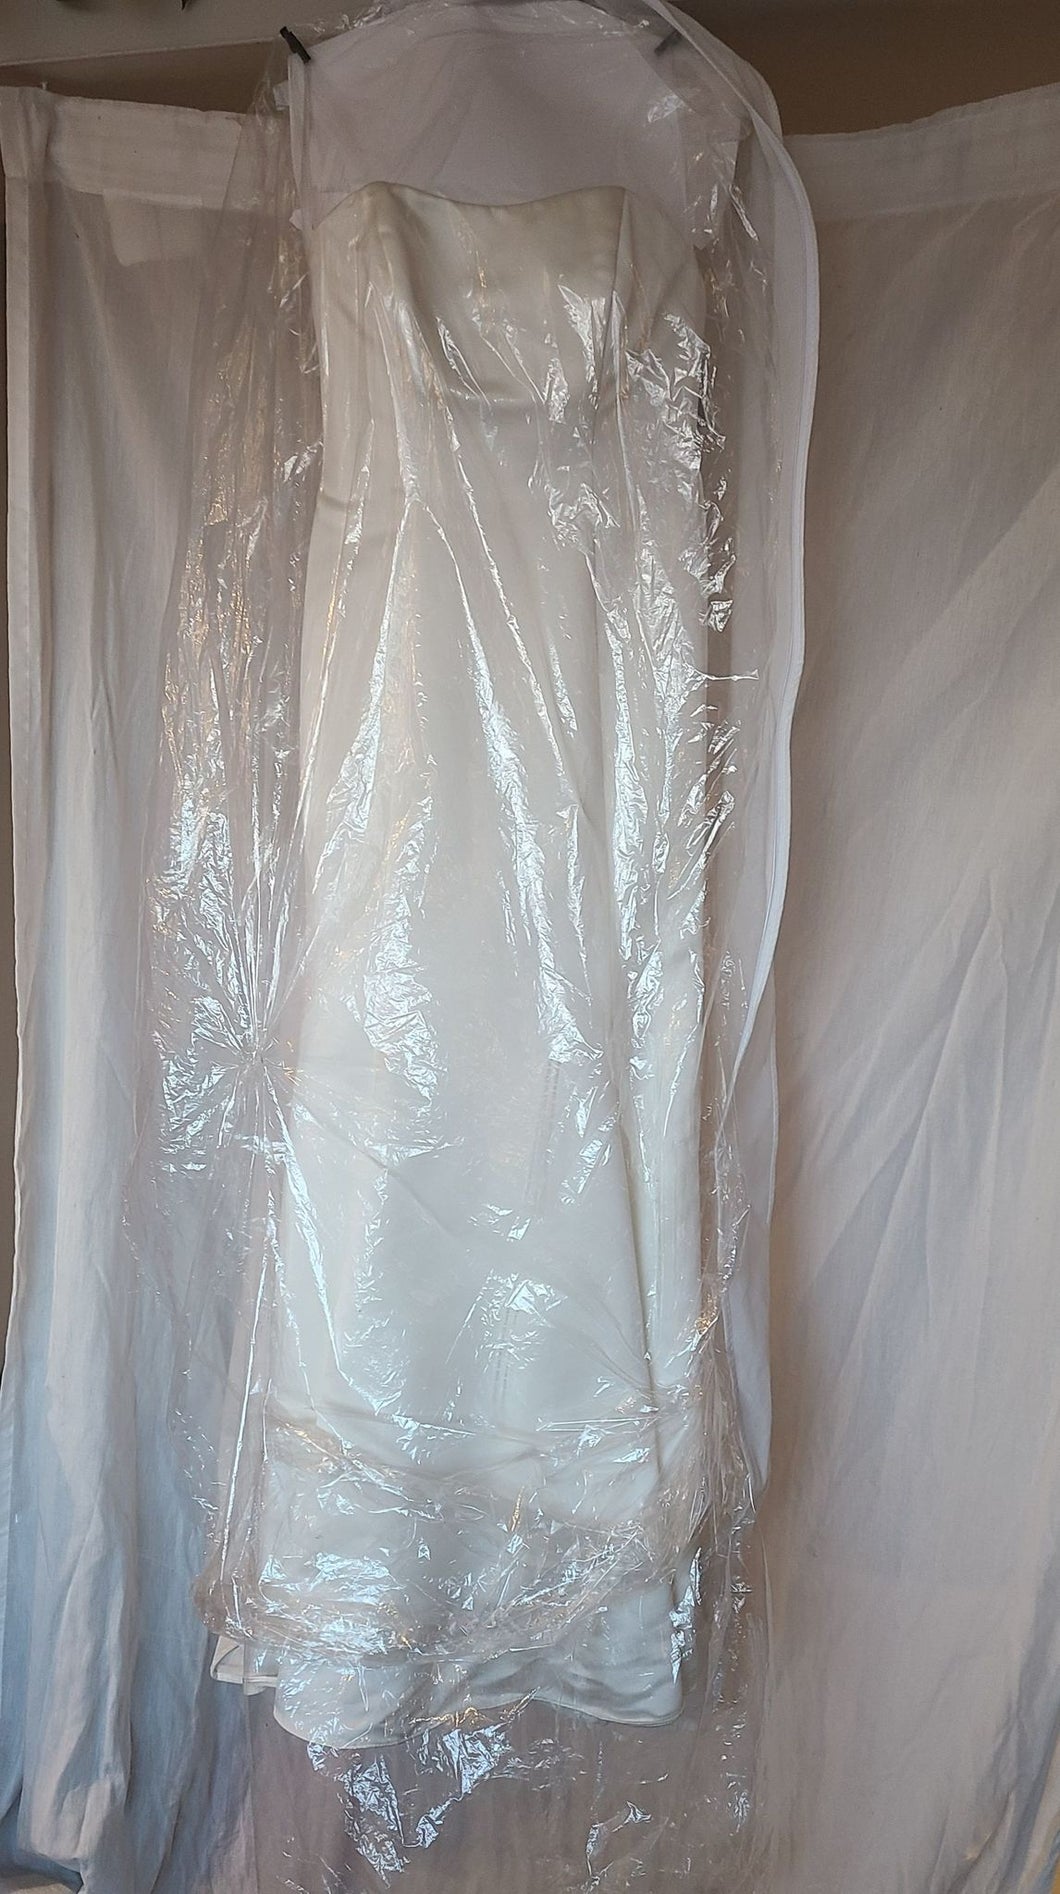 David's Bridal 'do not know ' wedding dress size-06 PREOWNED